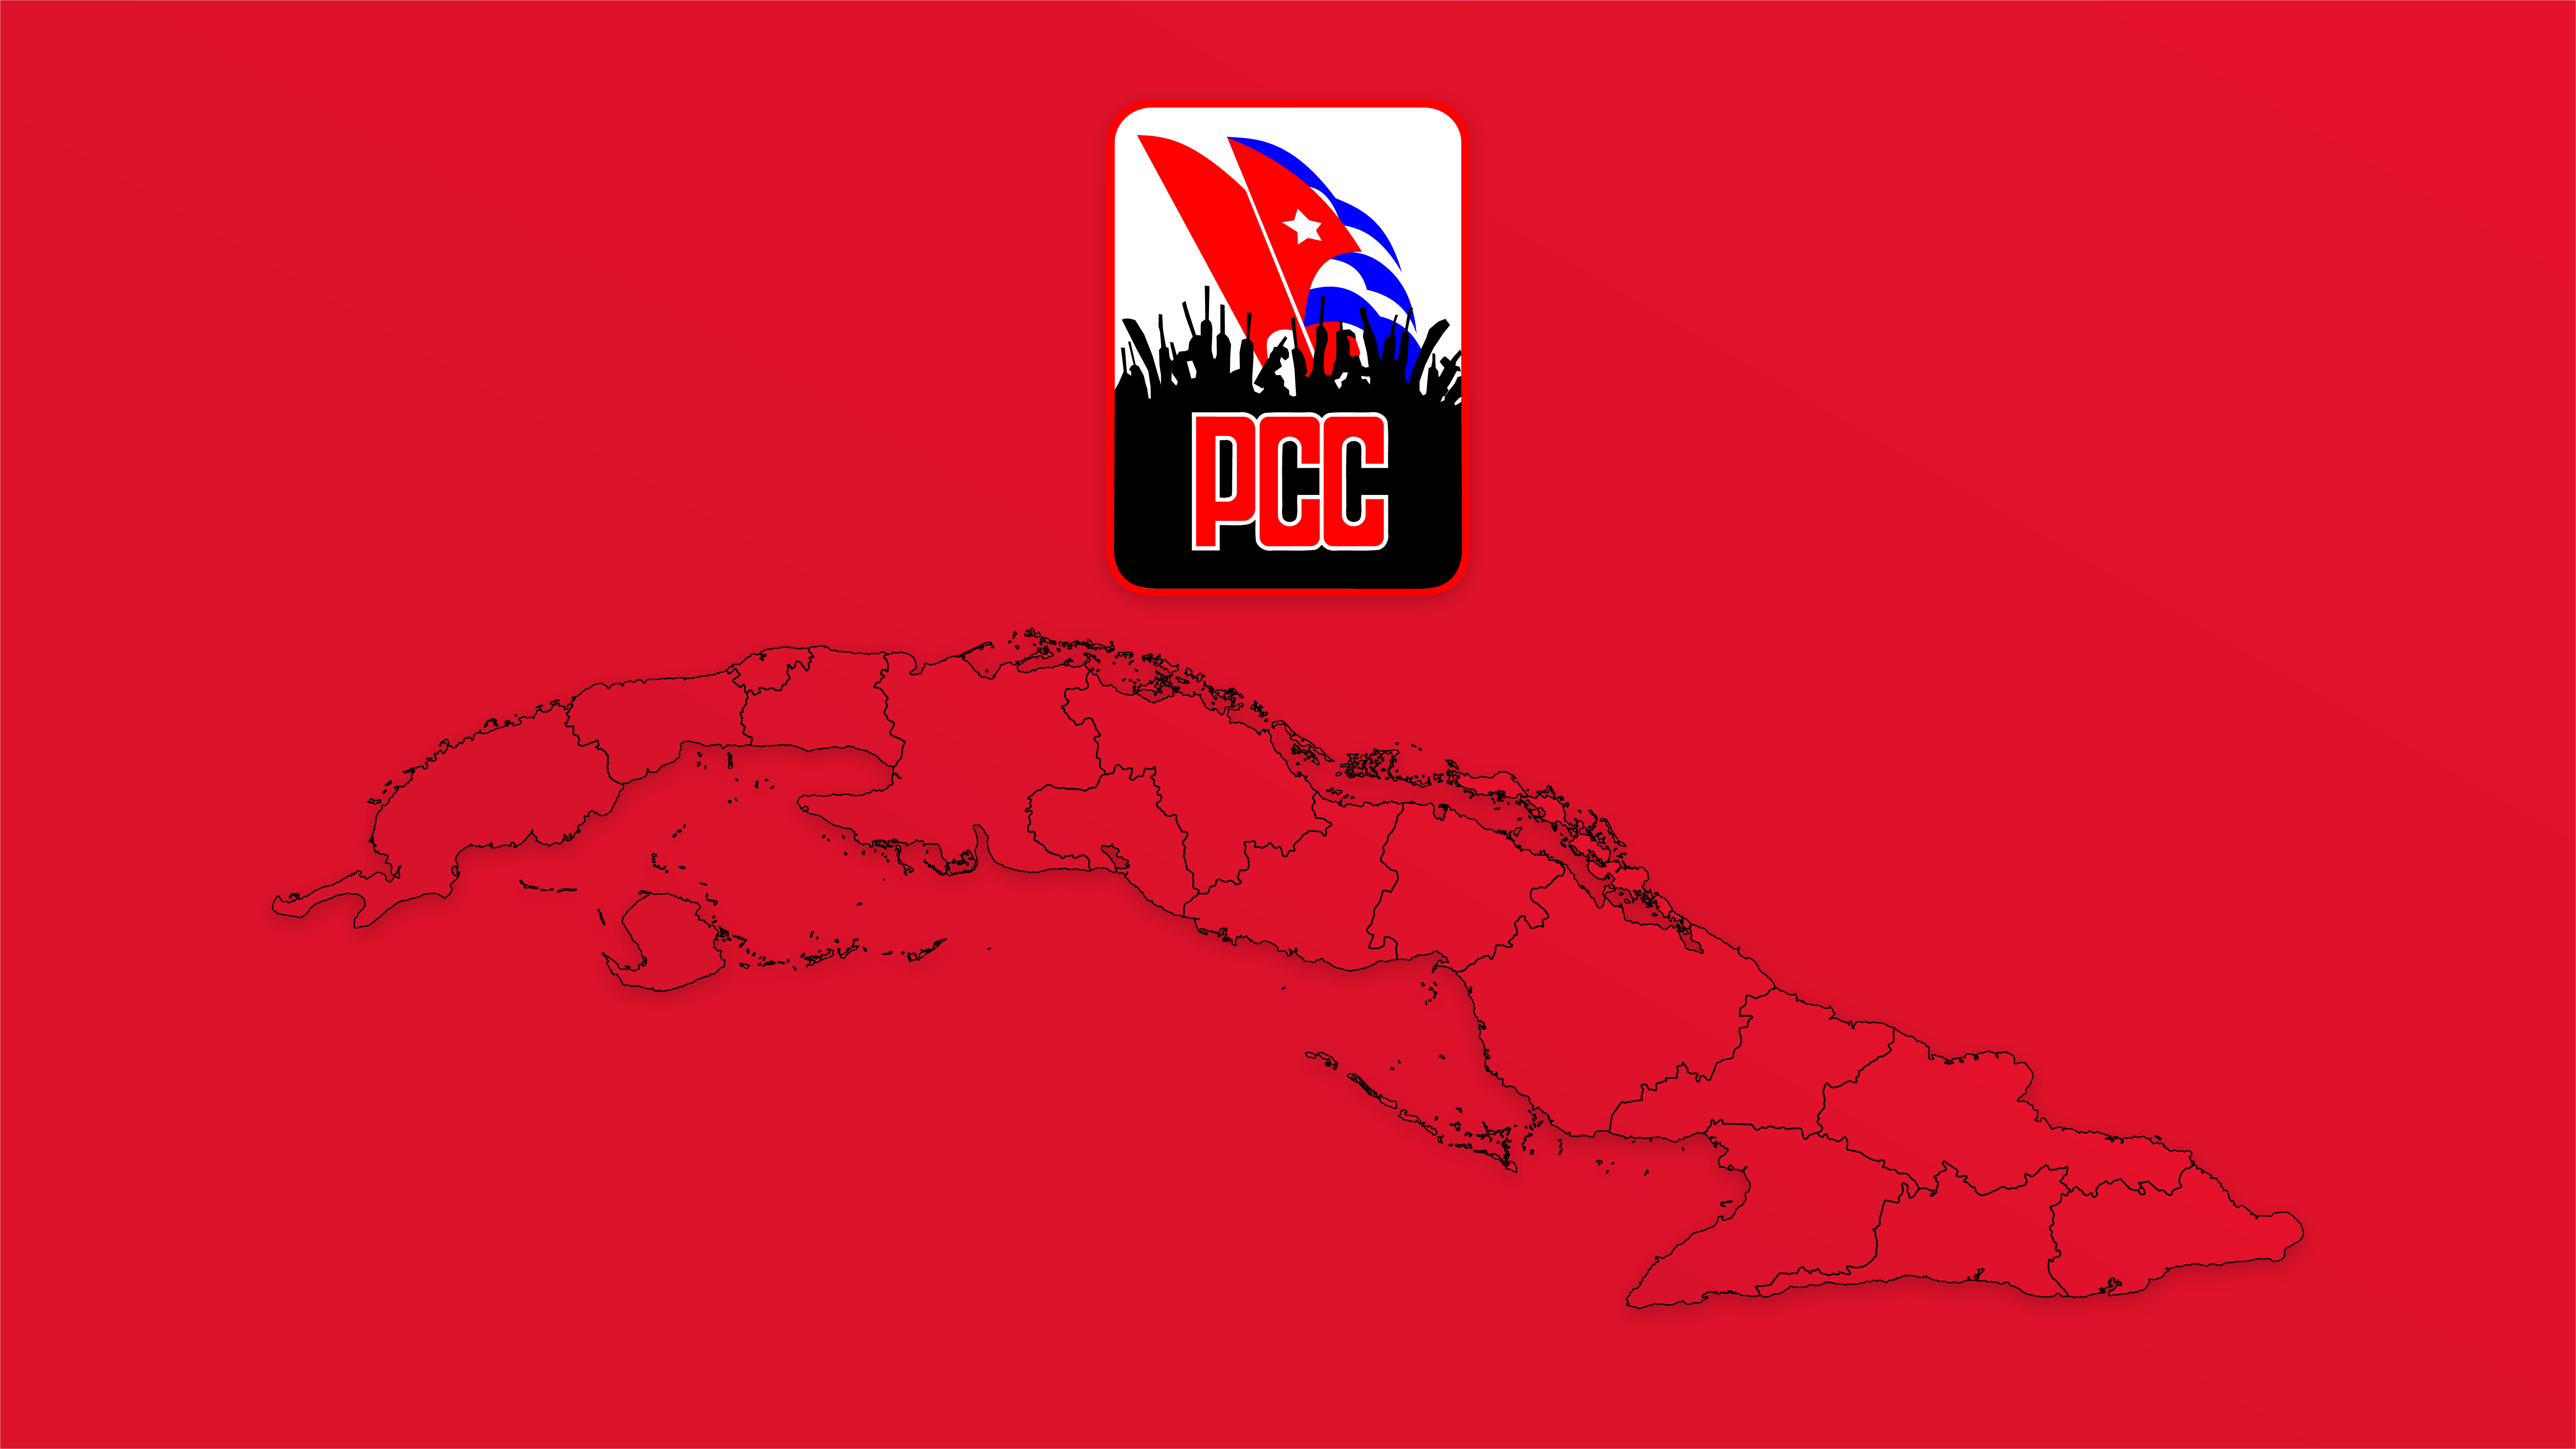 a wallpaper of a political map of cuba on a red background with the logo of the cuban communist party above it.